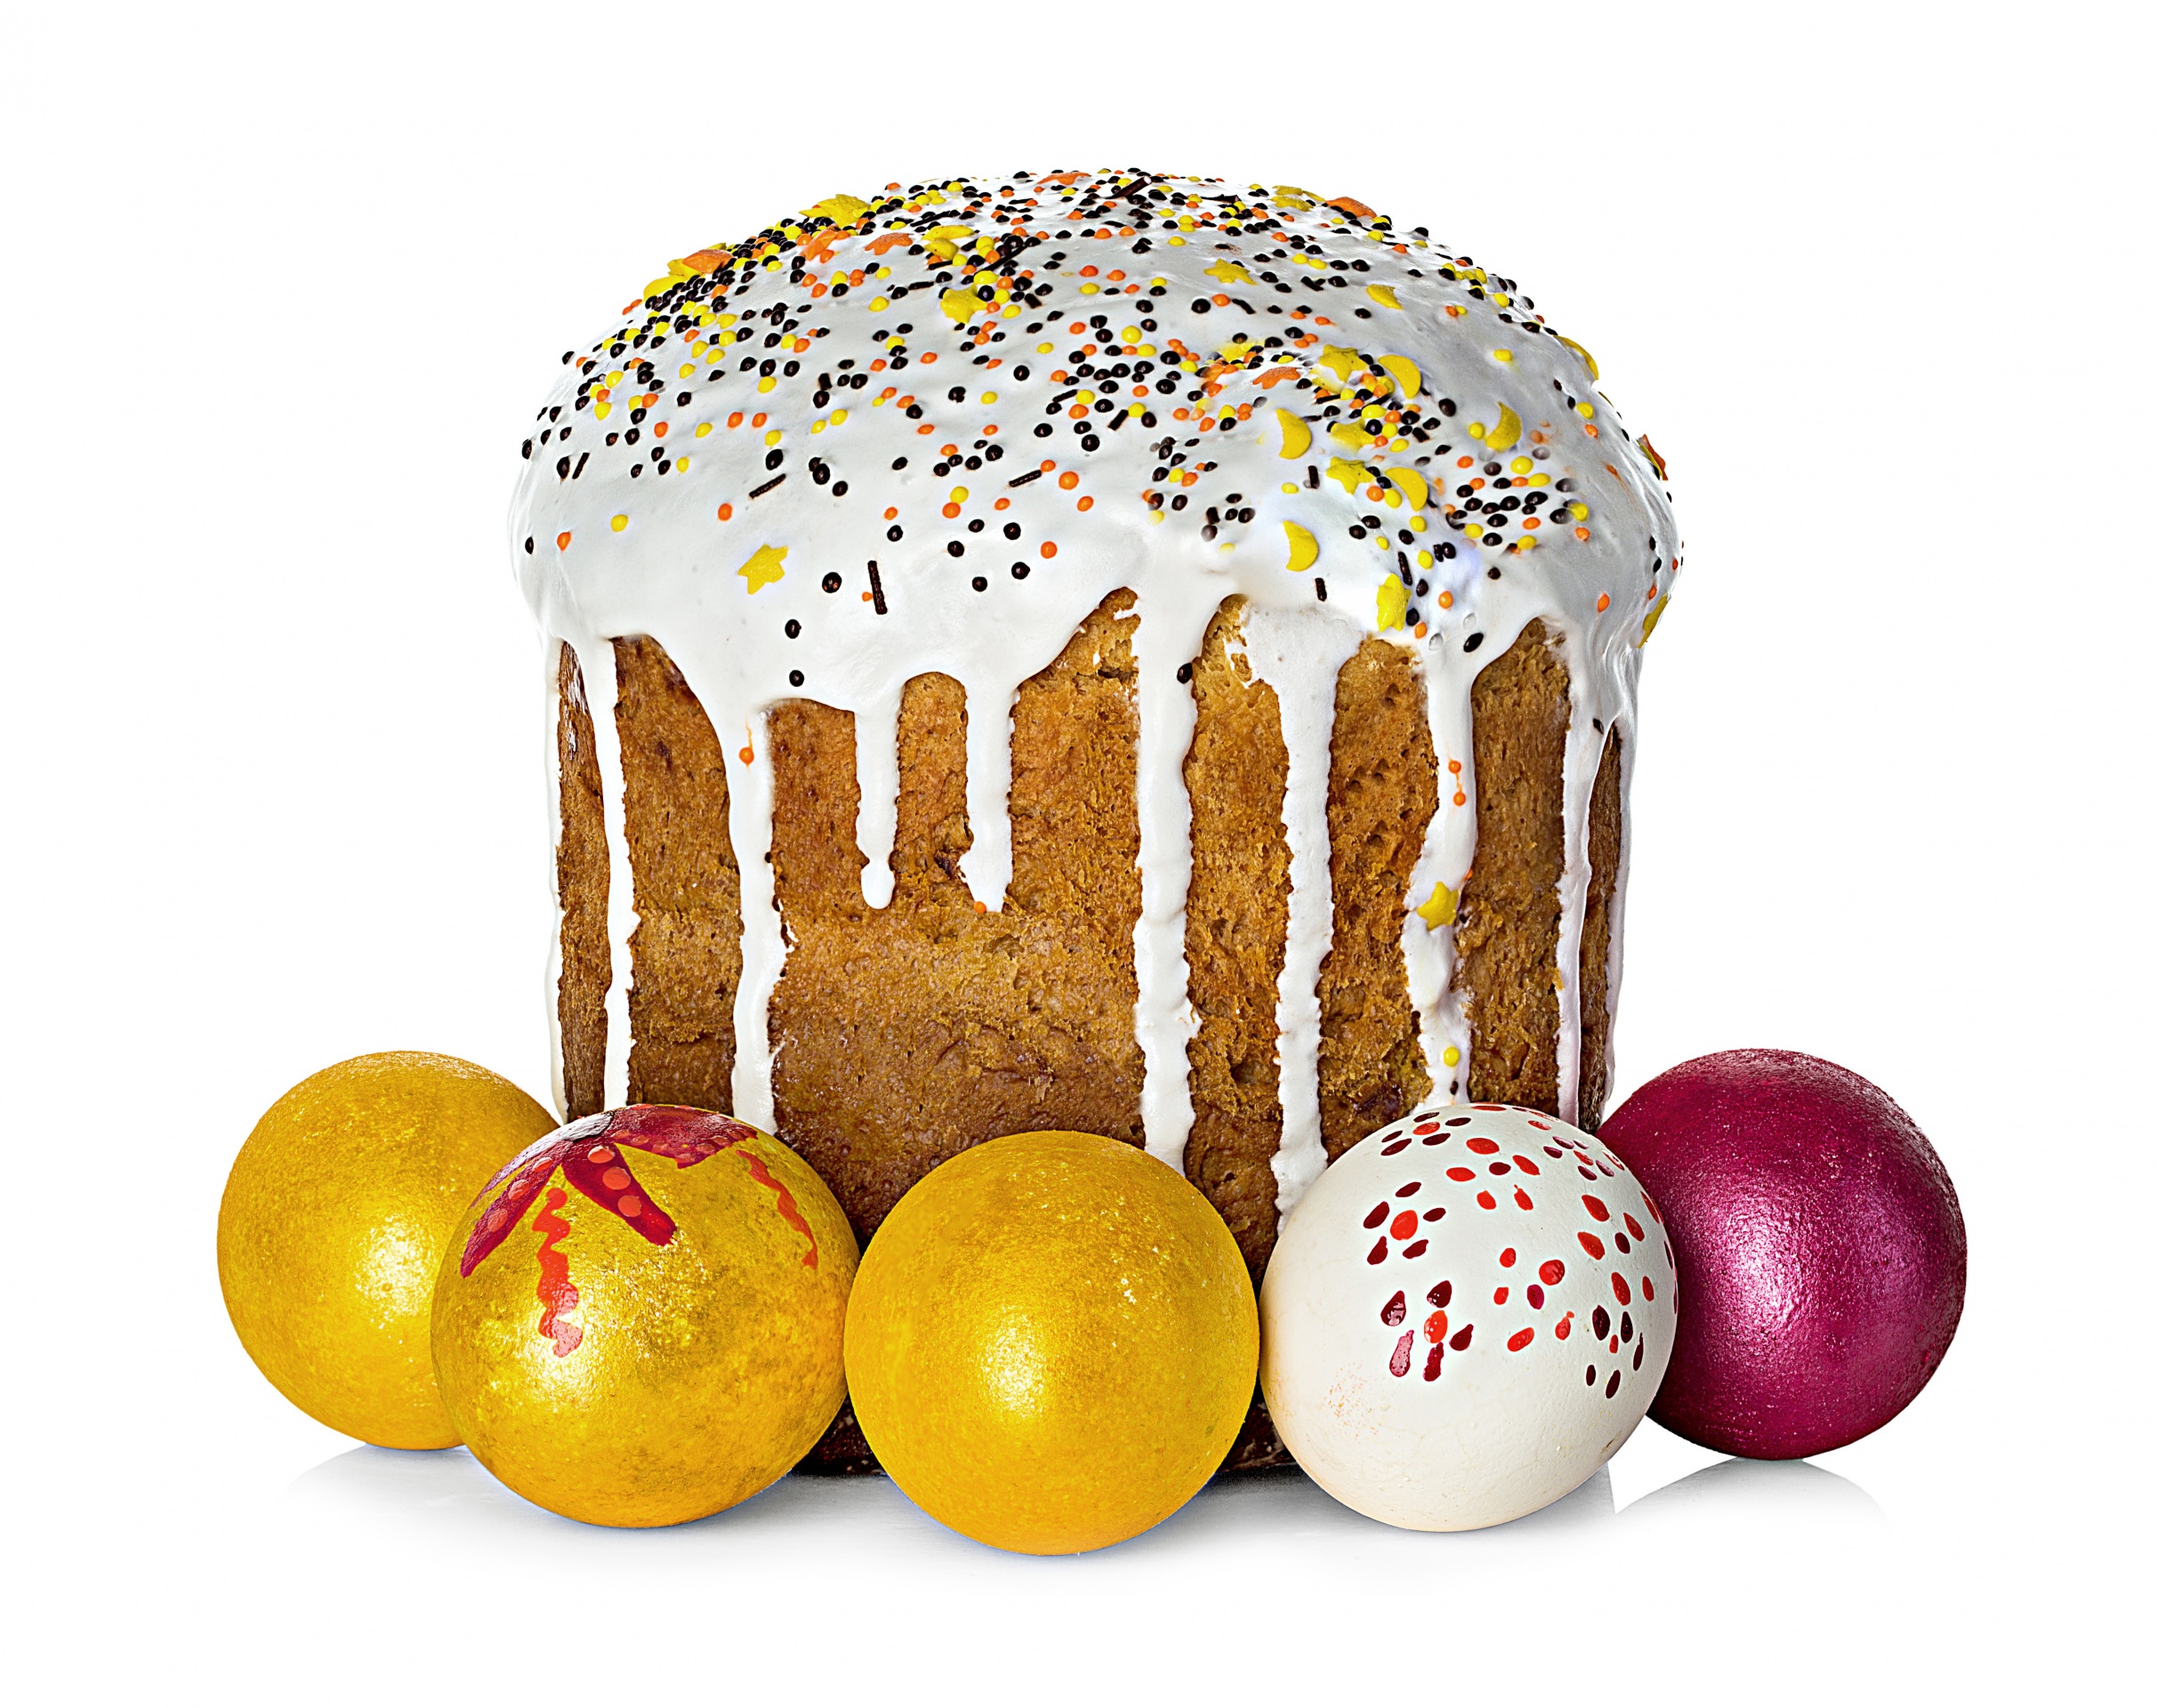 Holidays_Easter_Baking_Kulich_White_background_518370_2425x1920.jpg - 1.10 MB